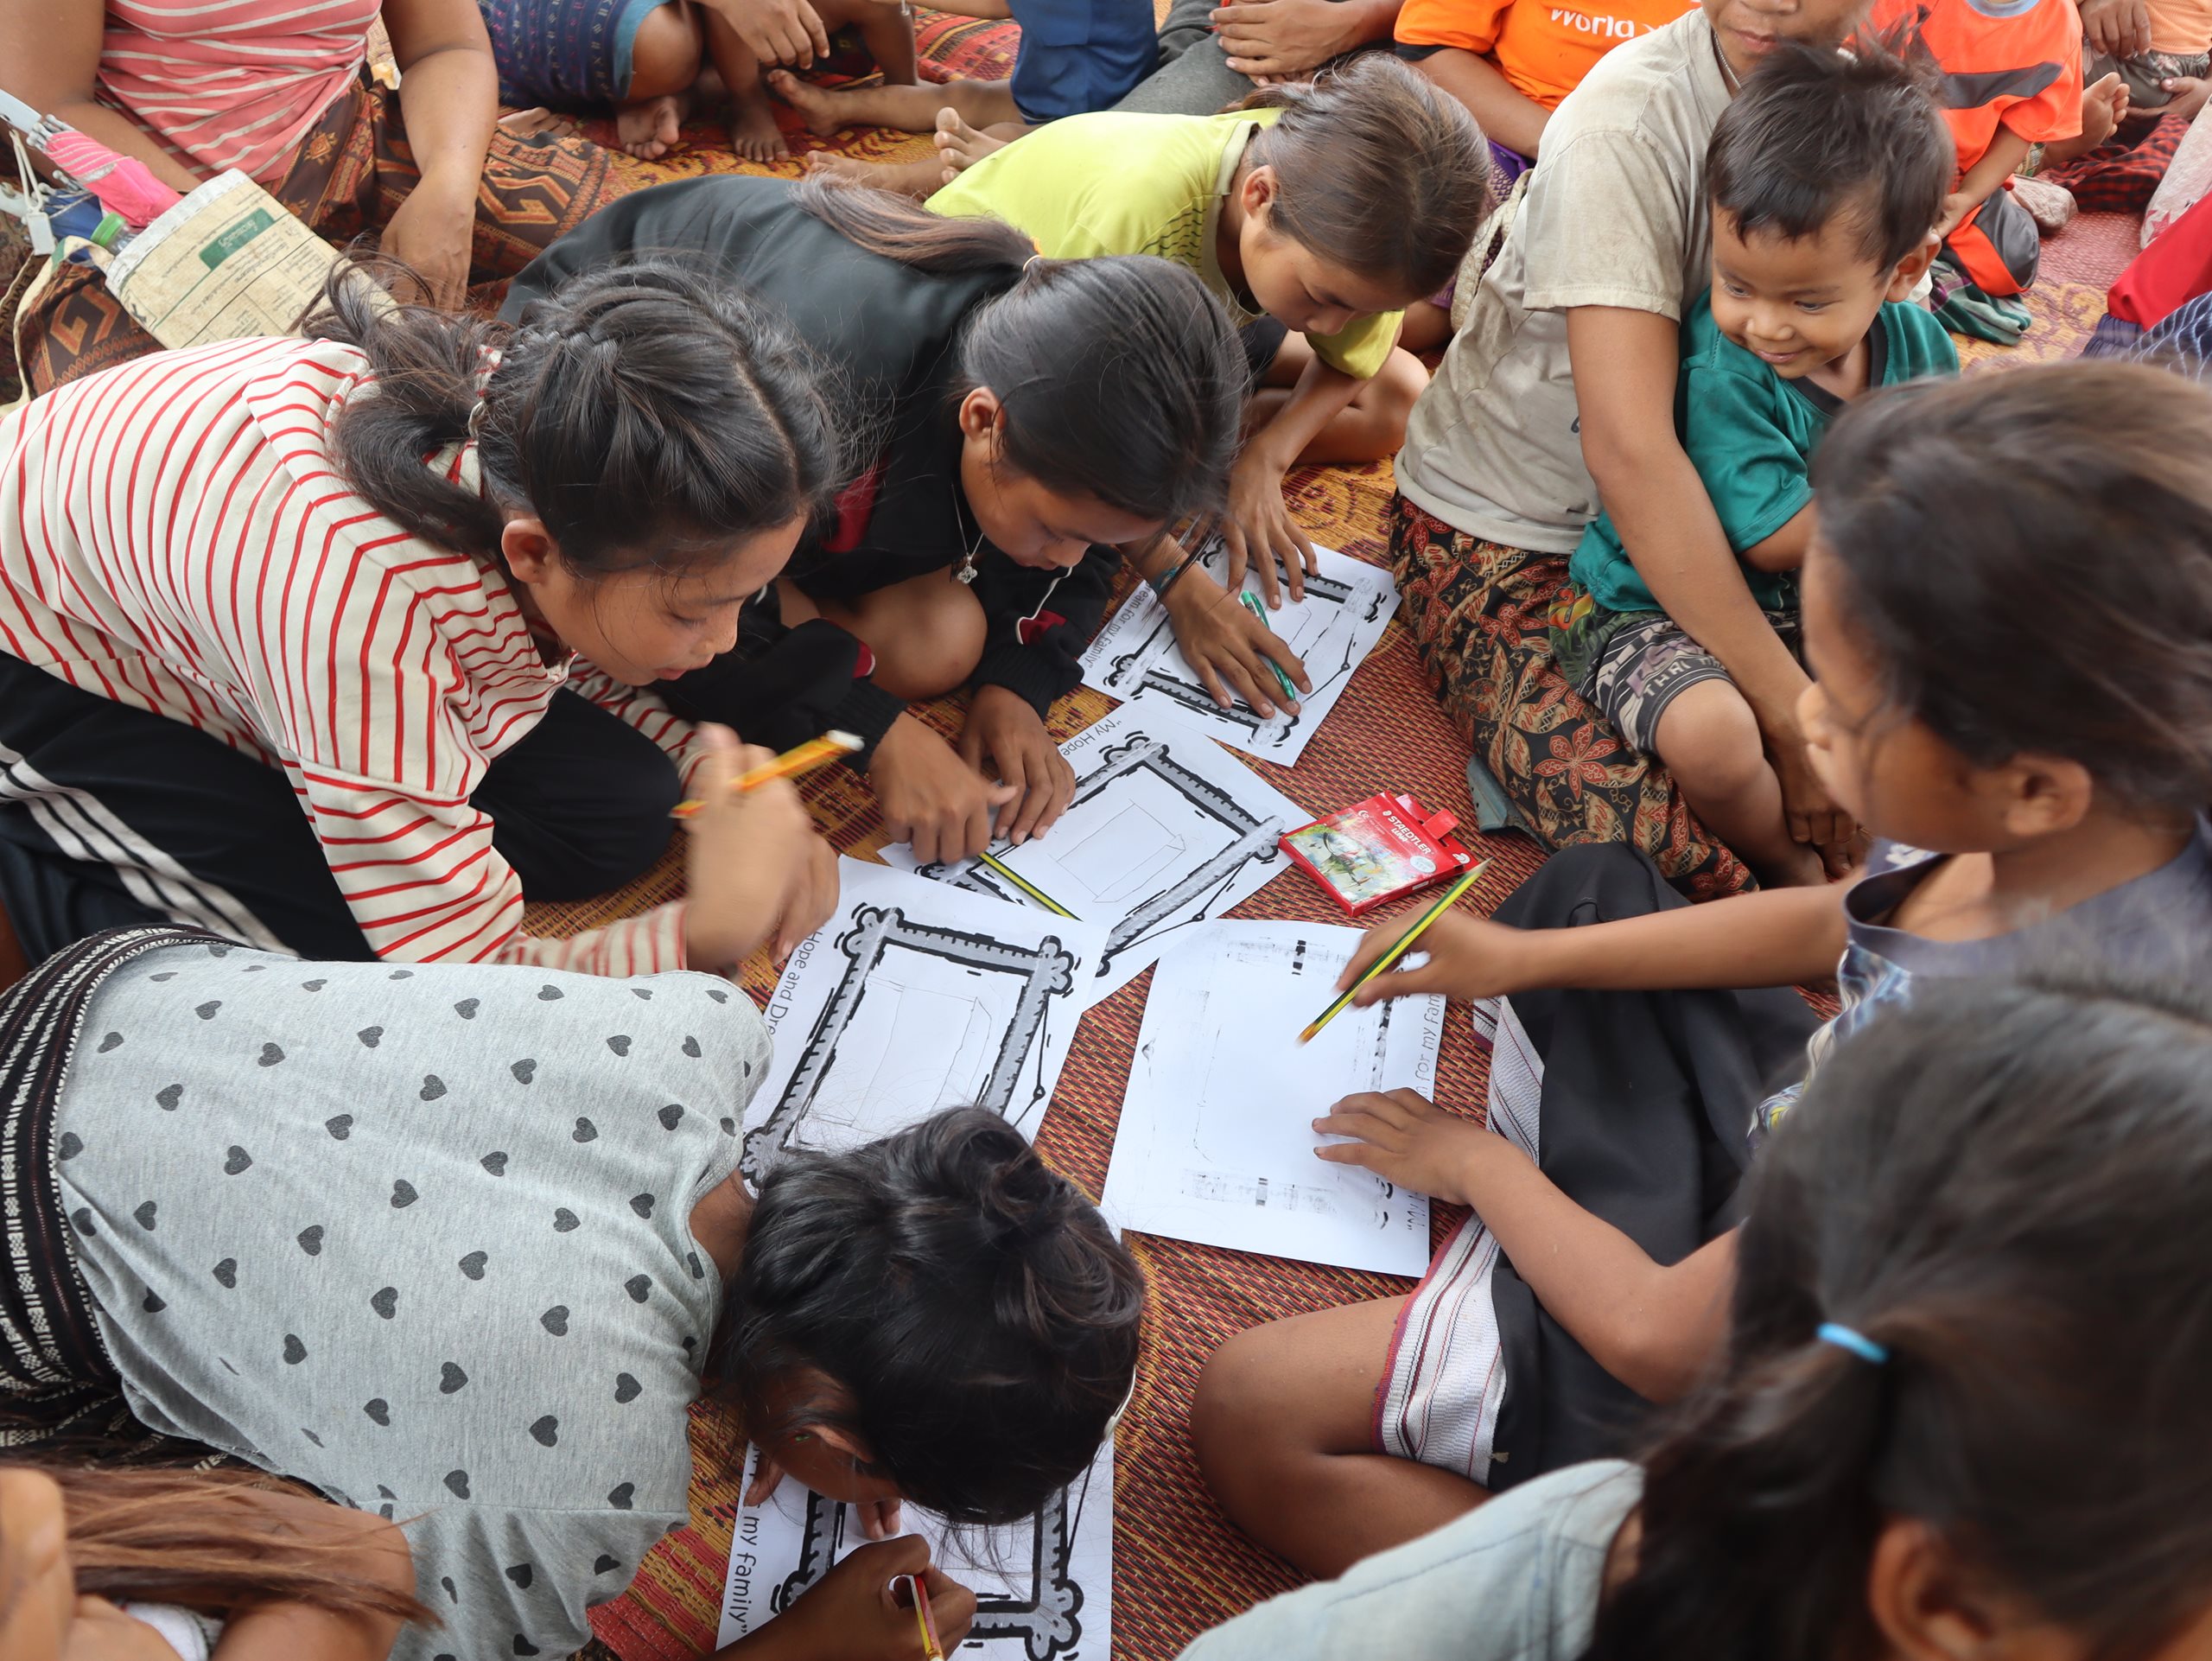 Children gather to participate in a drawing activity.